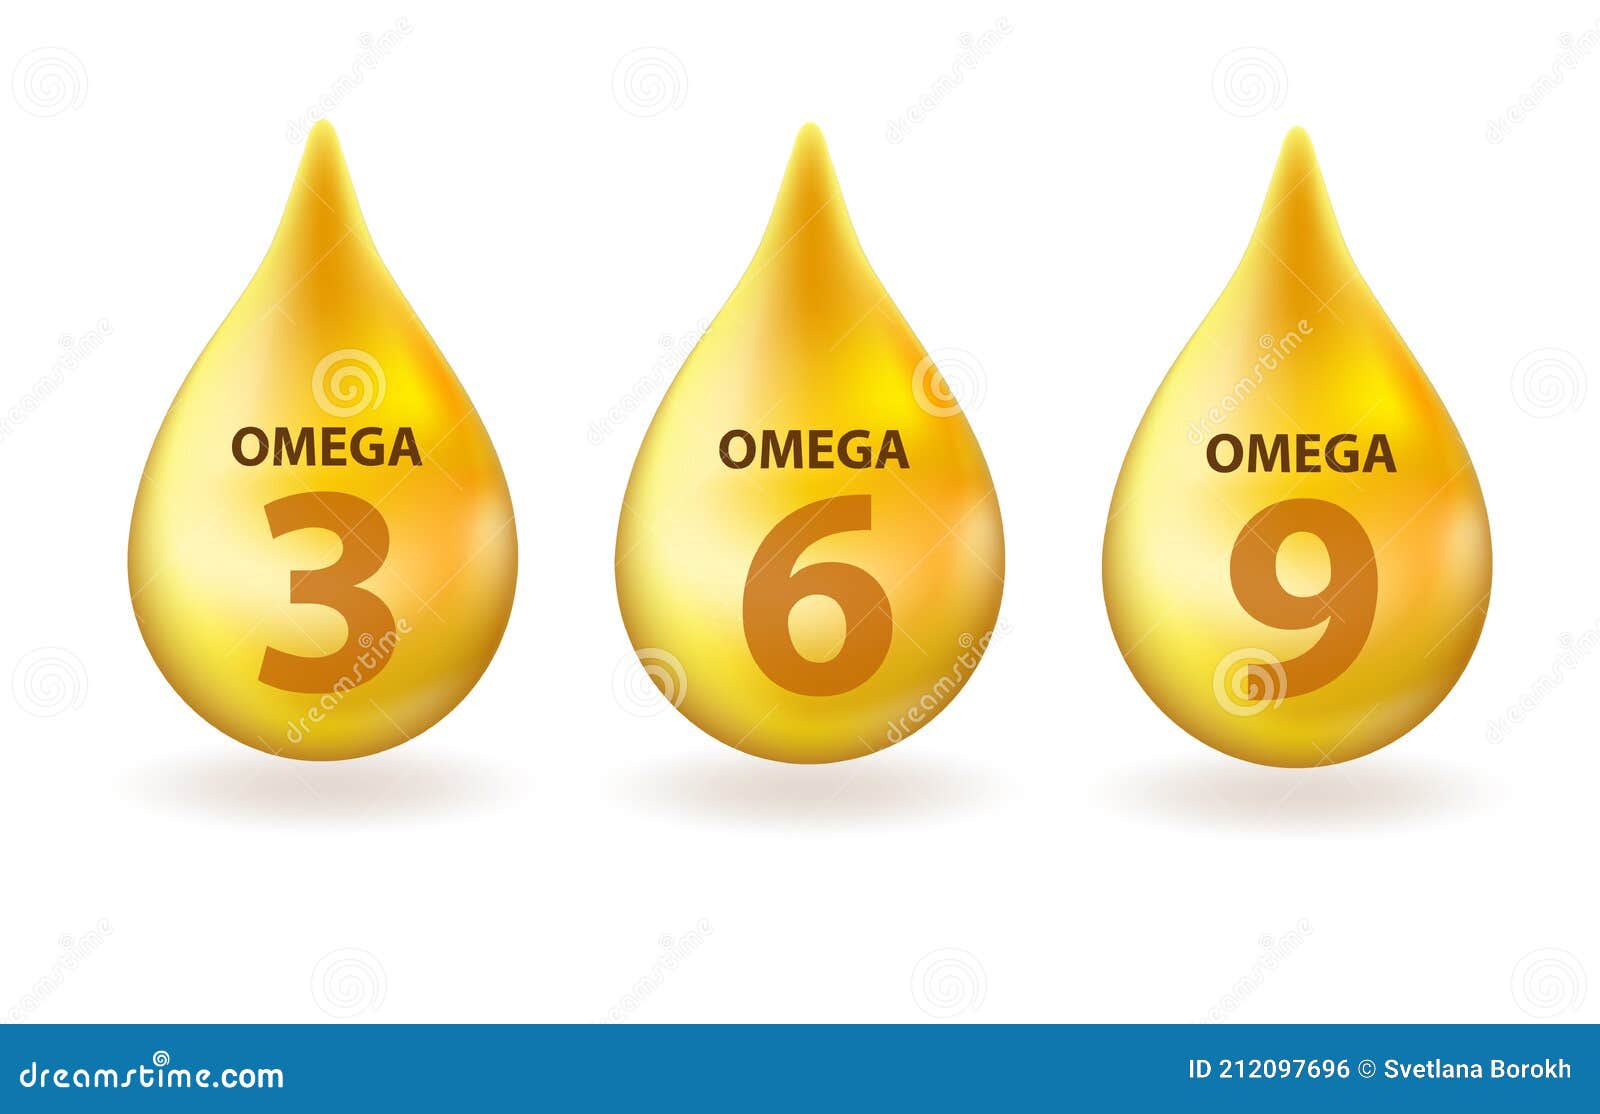 vitamin omega 3, 6, 9 drop realistic 3d style. fish fat. healthy lifestyle  concept